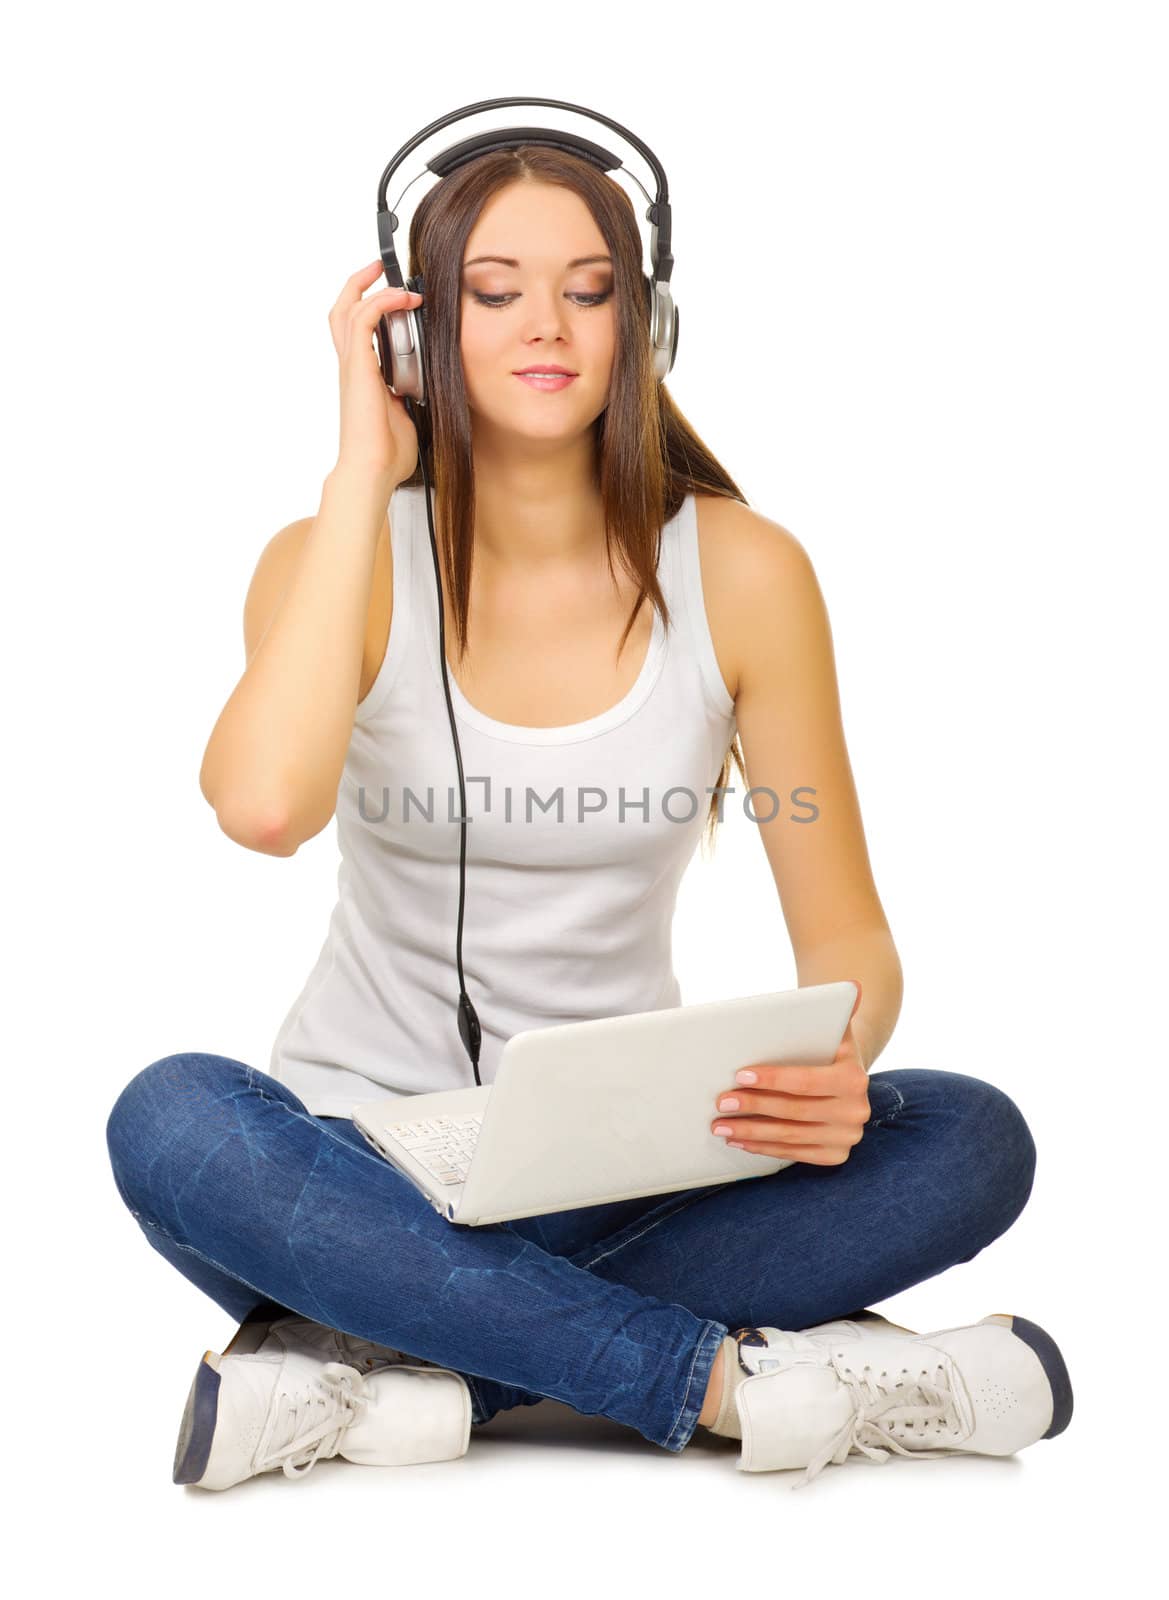 Young girl with headphones isolated